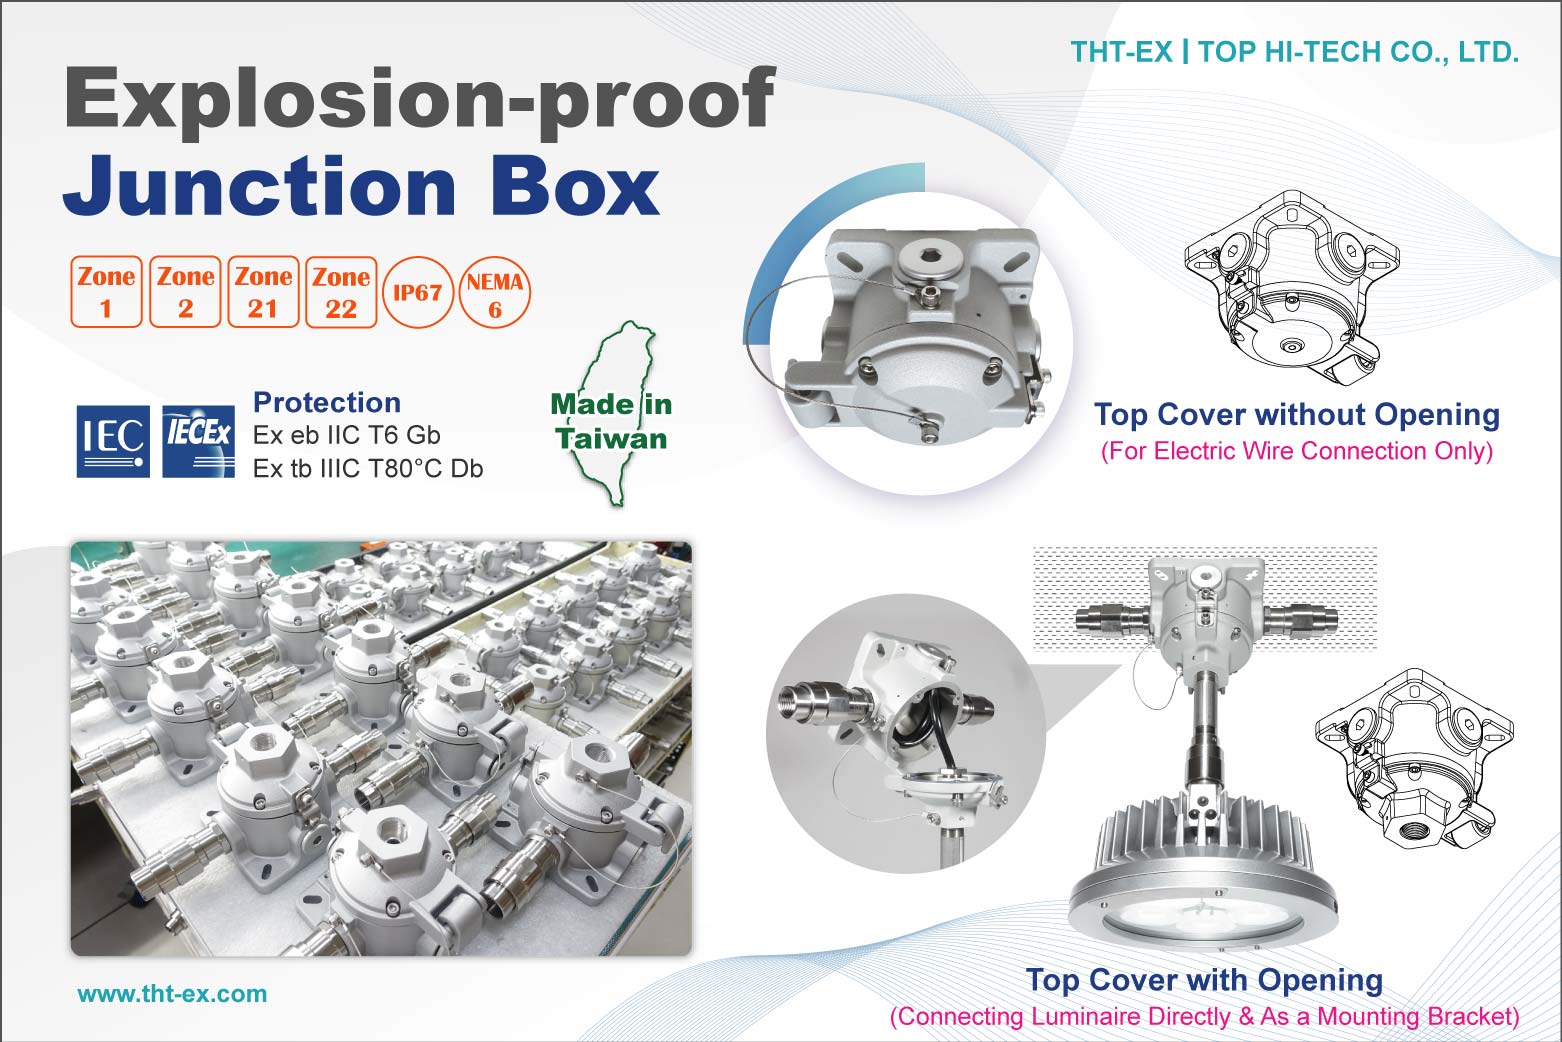  New Product! Explosion Proof Junction Box A1919